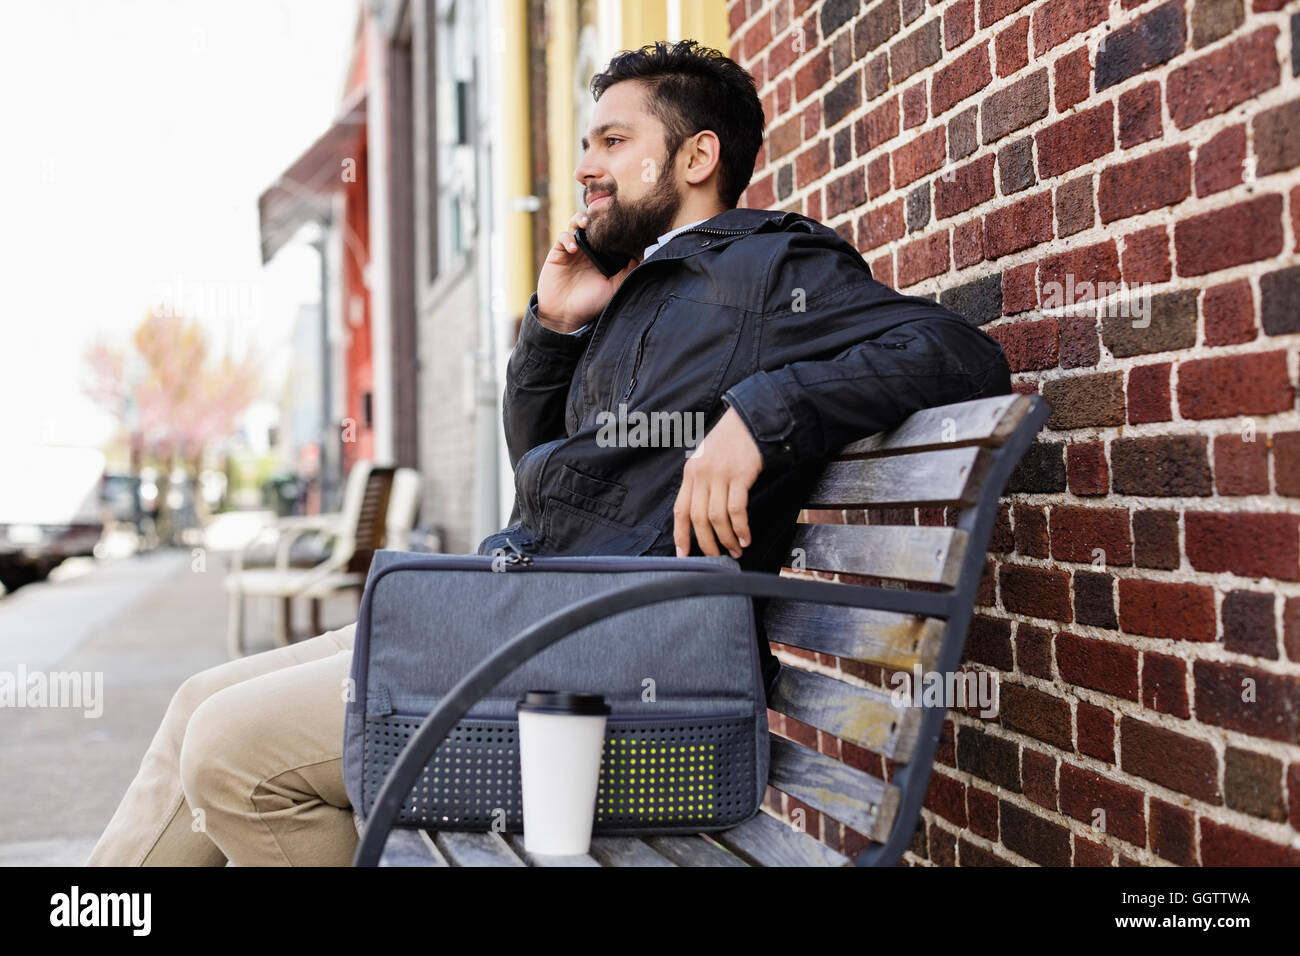 Hispanic man sitting on bench ville using cell phone Banque D'Images